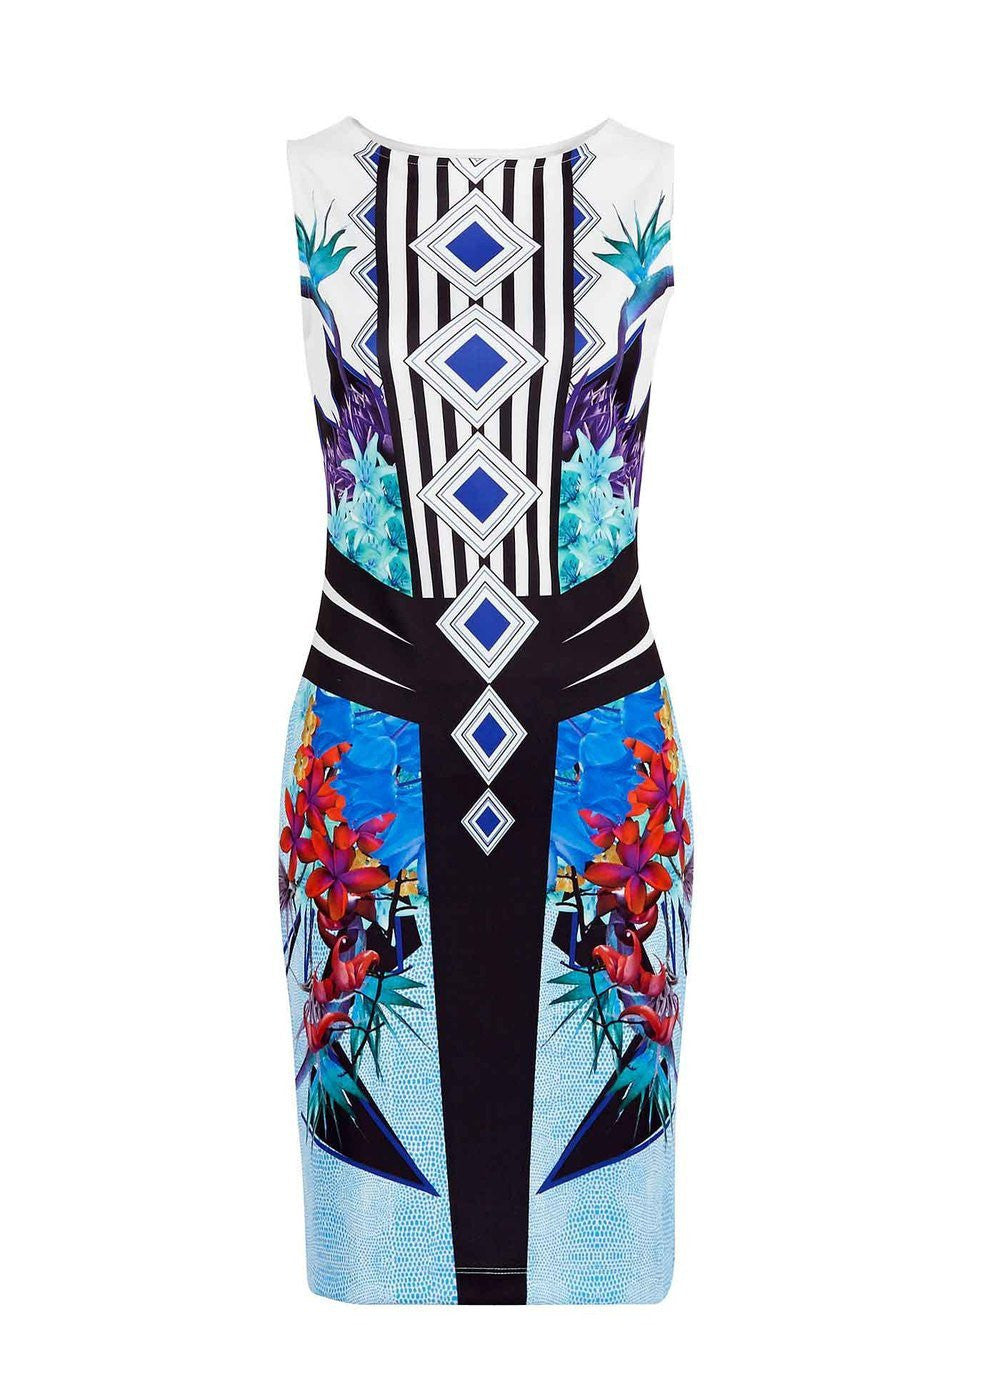 Women Dress Prom Cocktail Party Bodycon Tropical Floral Print summer Dress Desigual 2161